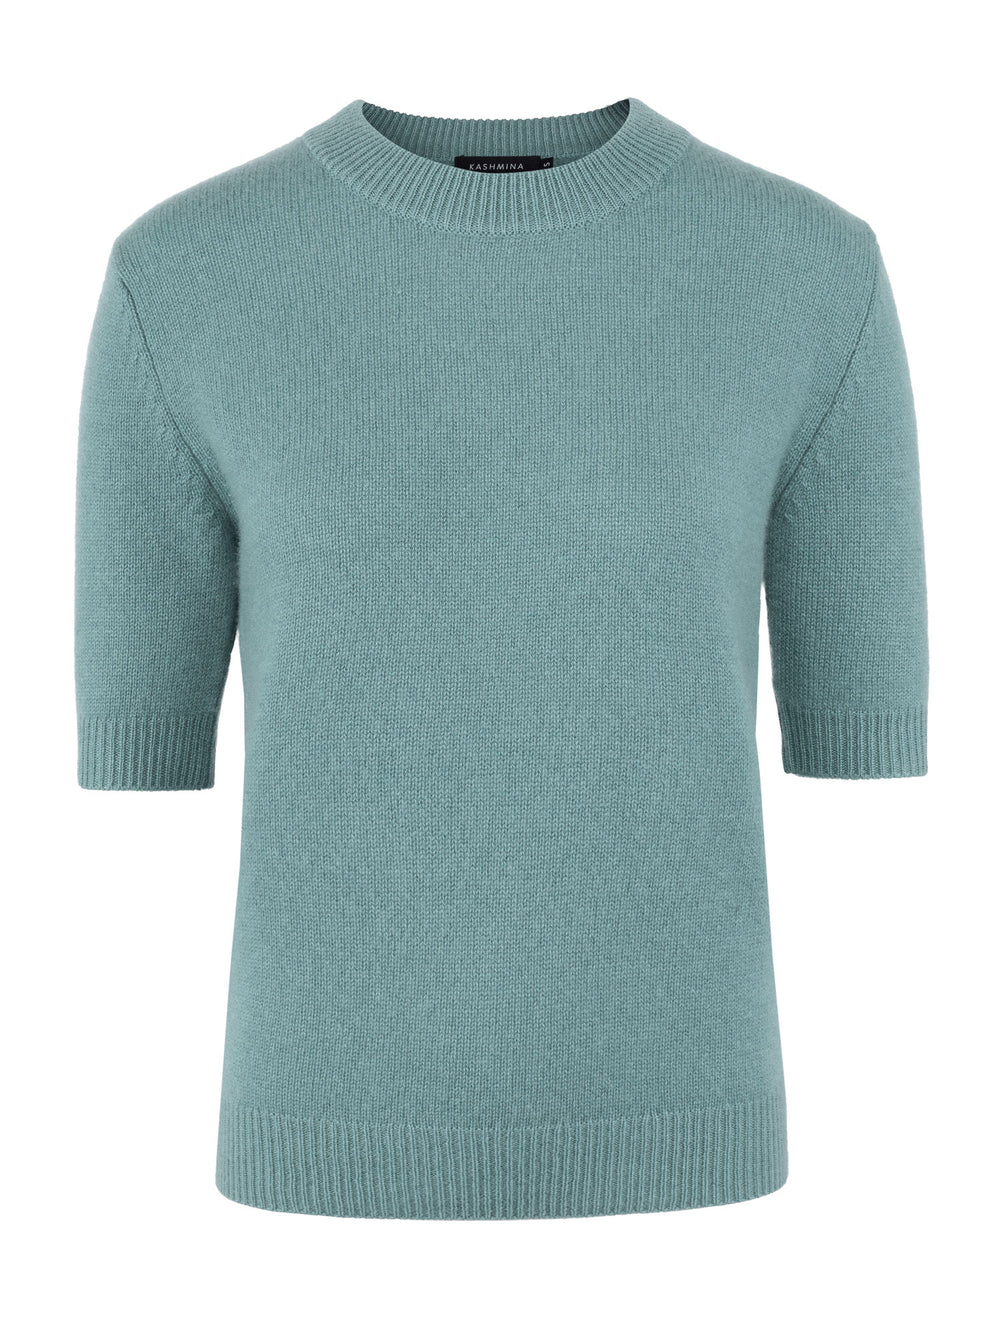 Short sleeved cashmere sweater from Kashmina 100% pure cashmere